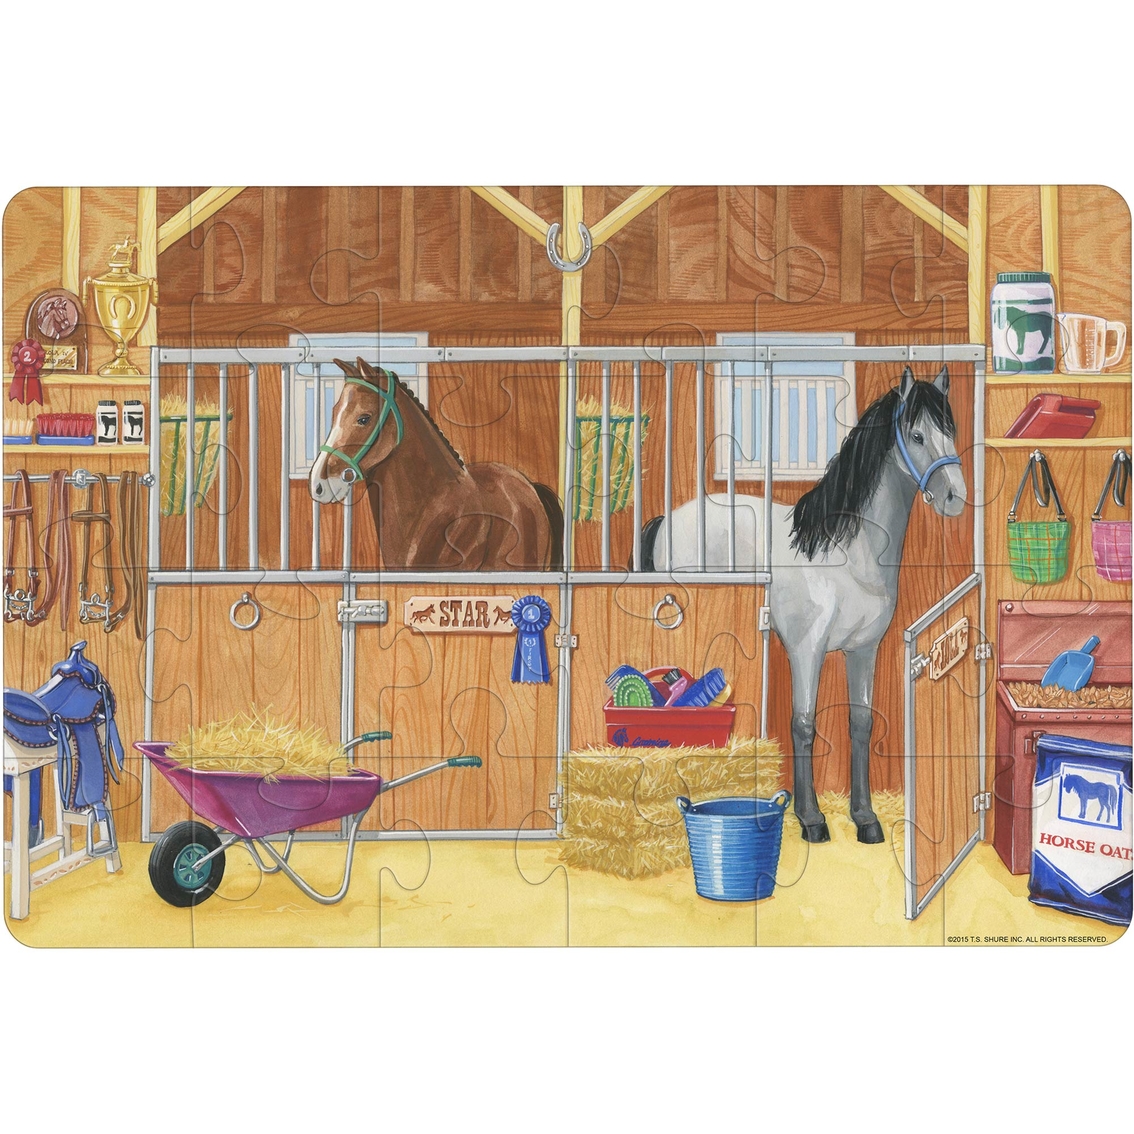 T.S. Shure Horse Stable Jumbo Floor Puzzle - Image 2 of 2